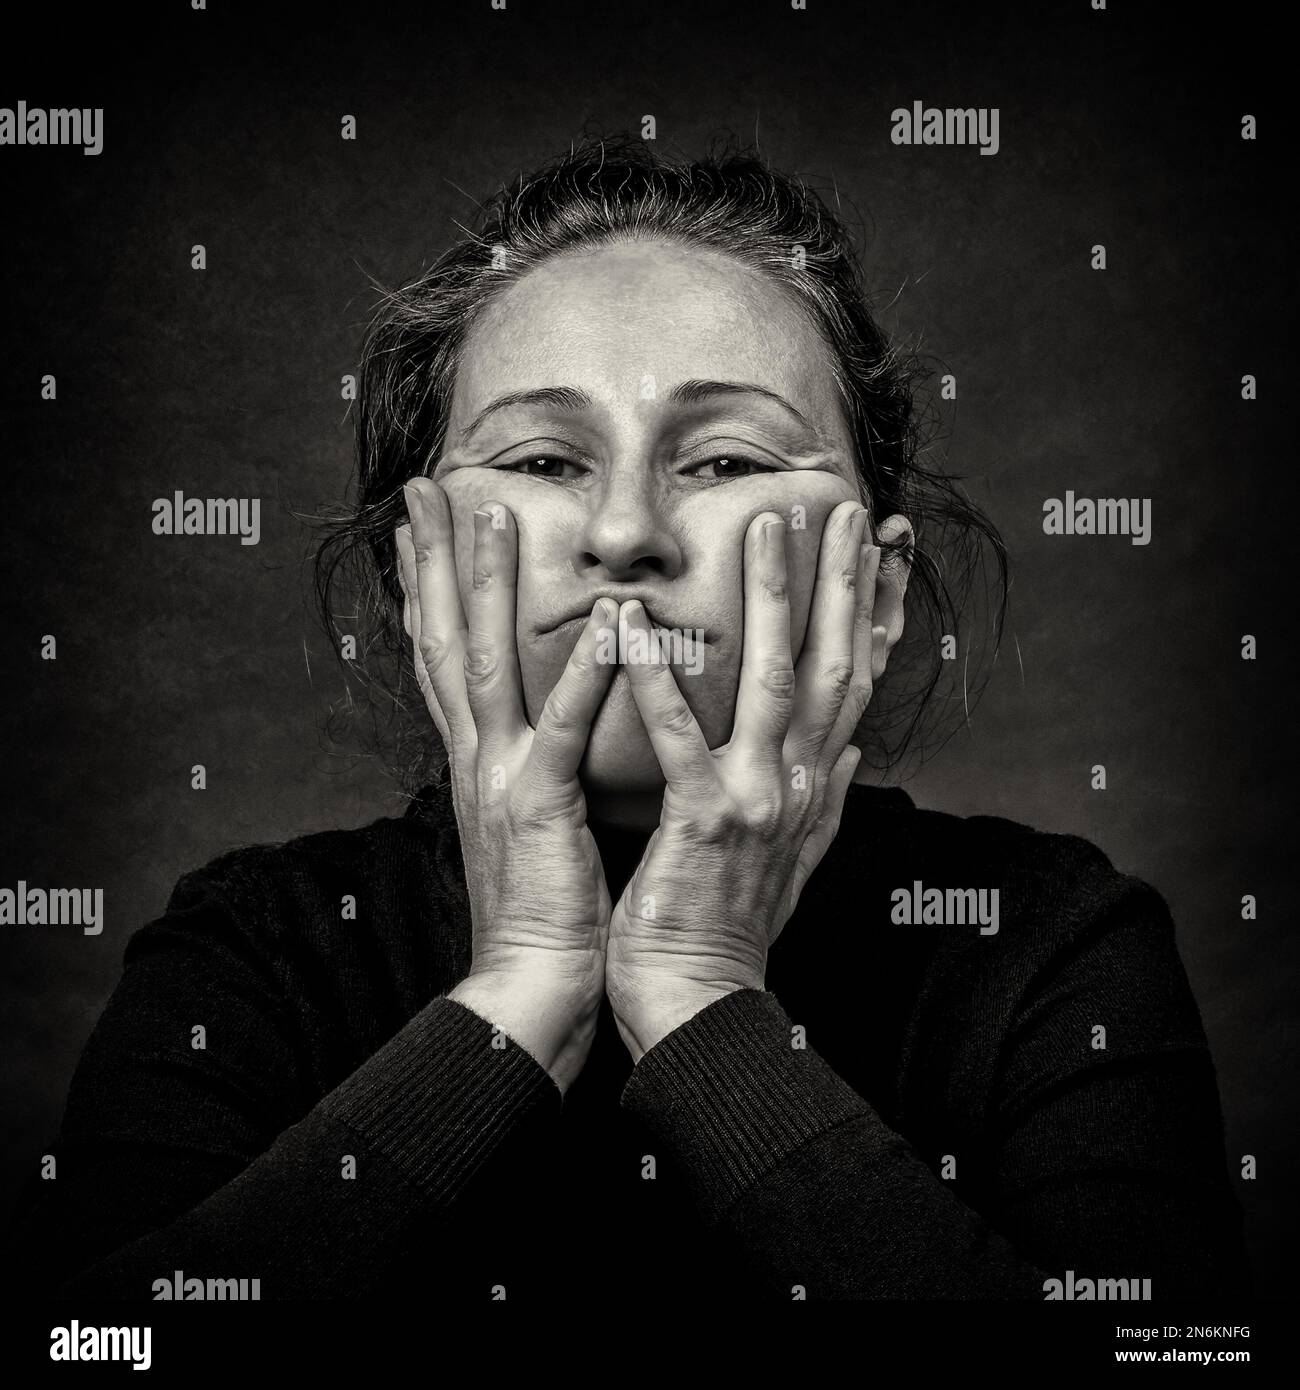 Conceptual dark portrait of old tired woman stretching the skin of her face in ugly grimace.  Black and White film grain. Stock Photo